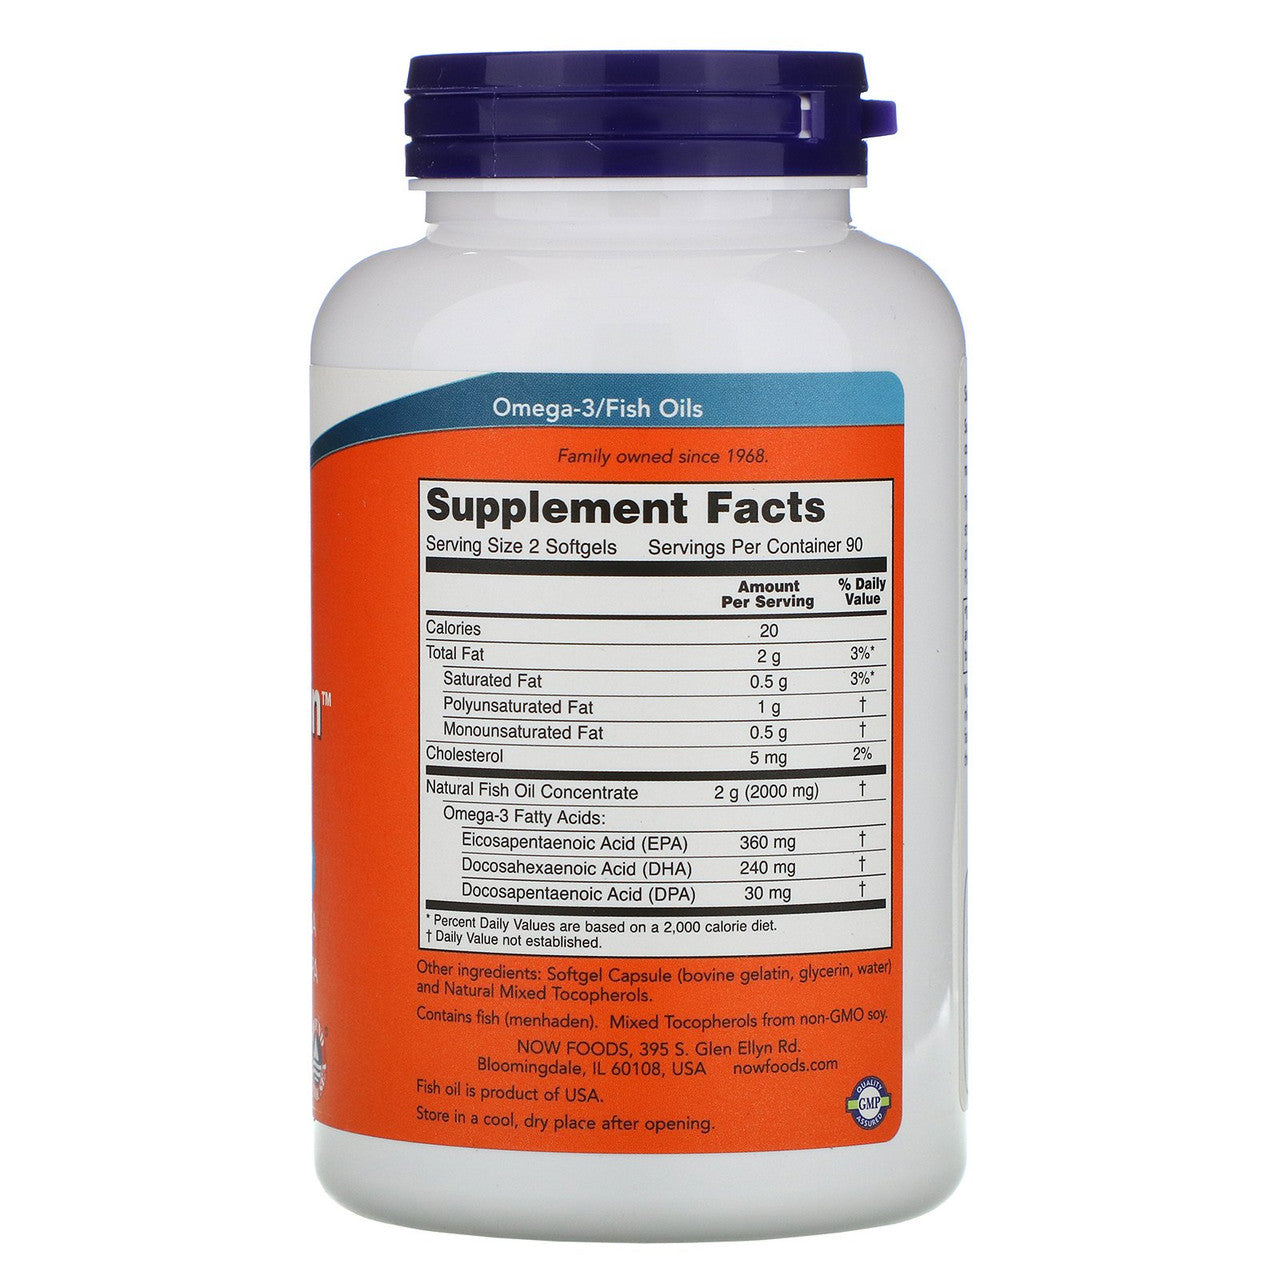 Now Eco-Sustain Omega-3 Supplement Facts Label